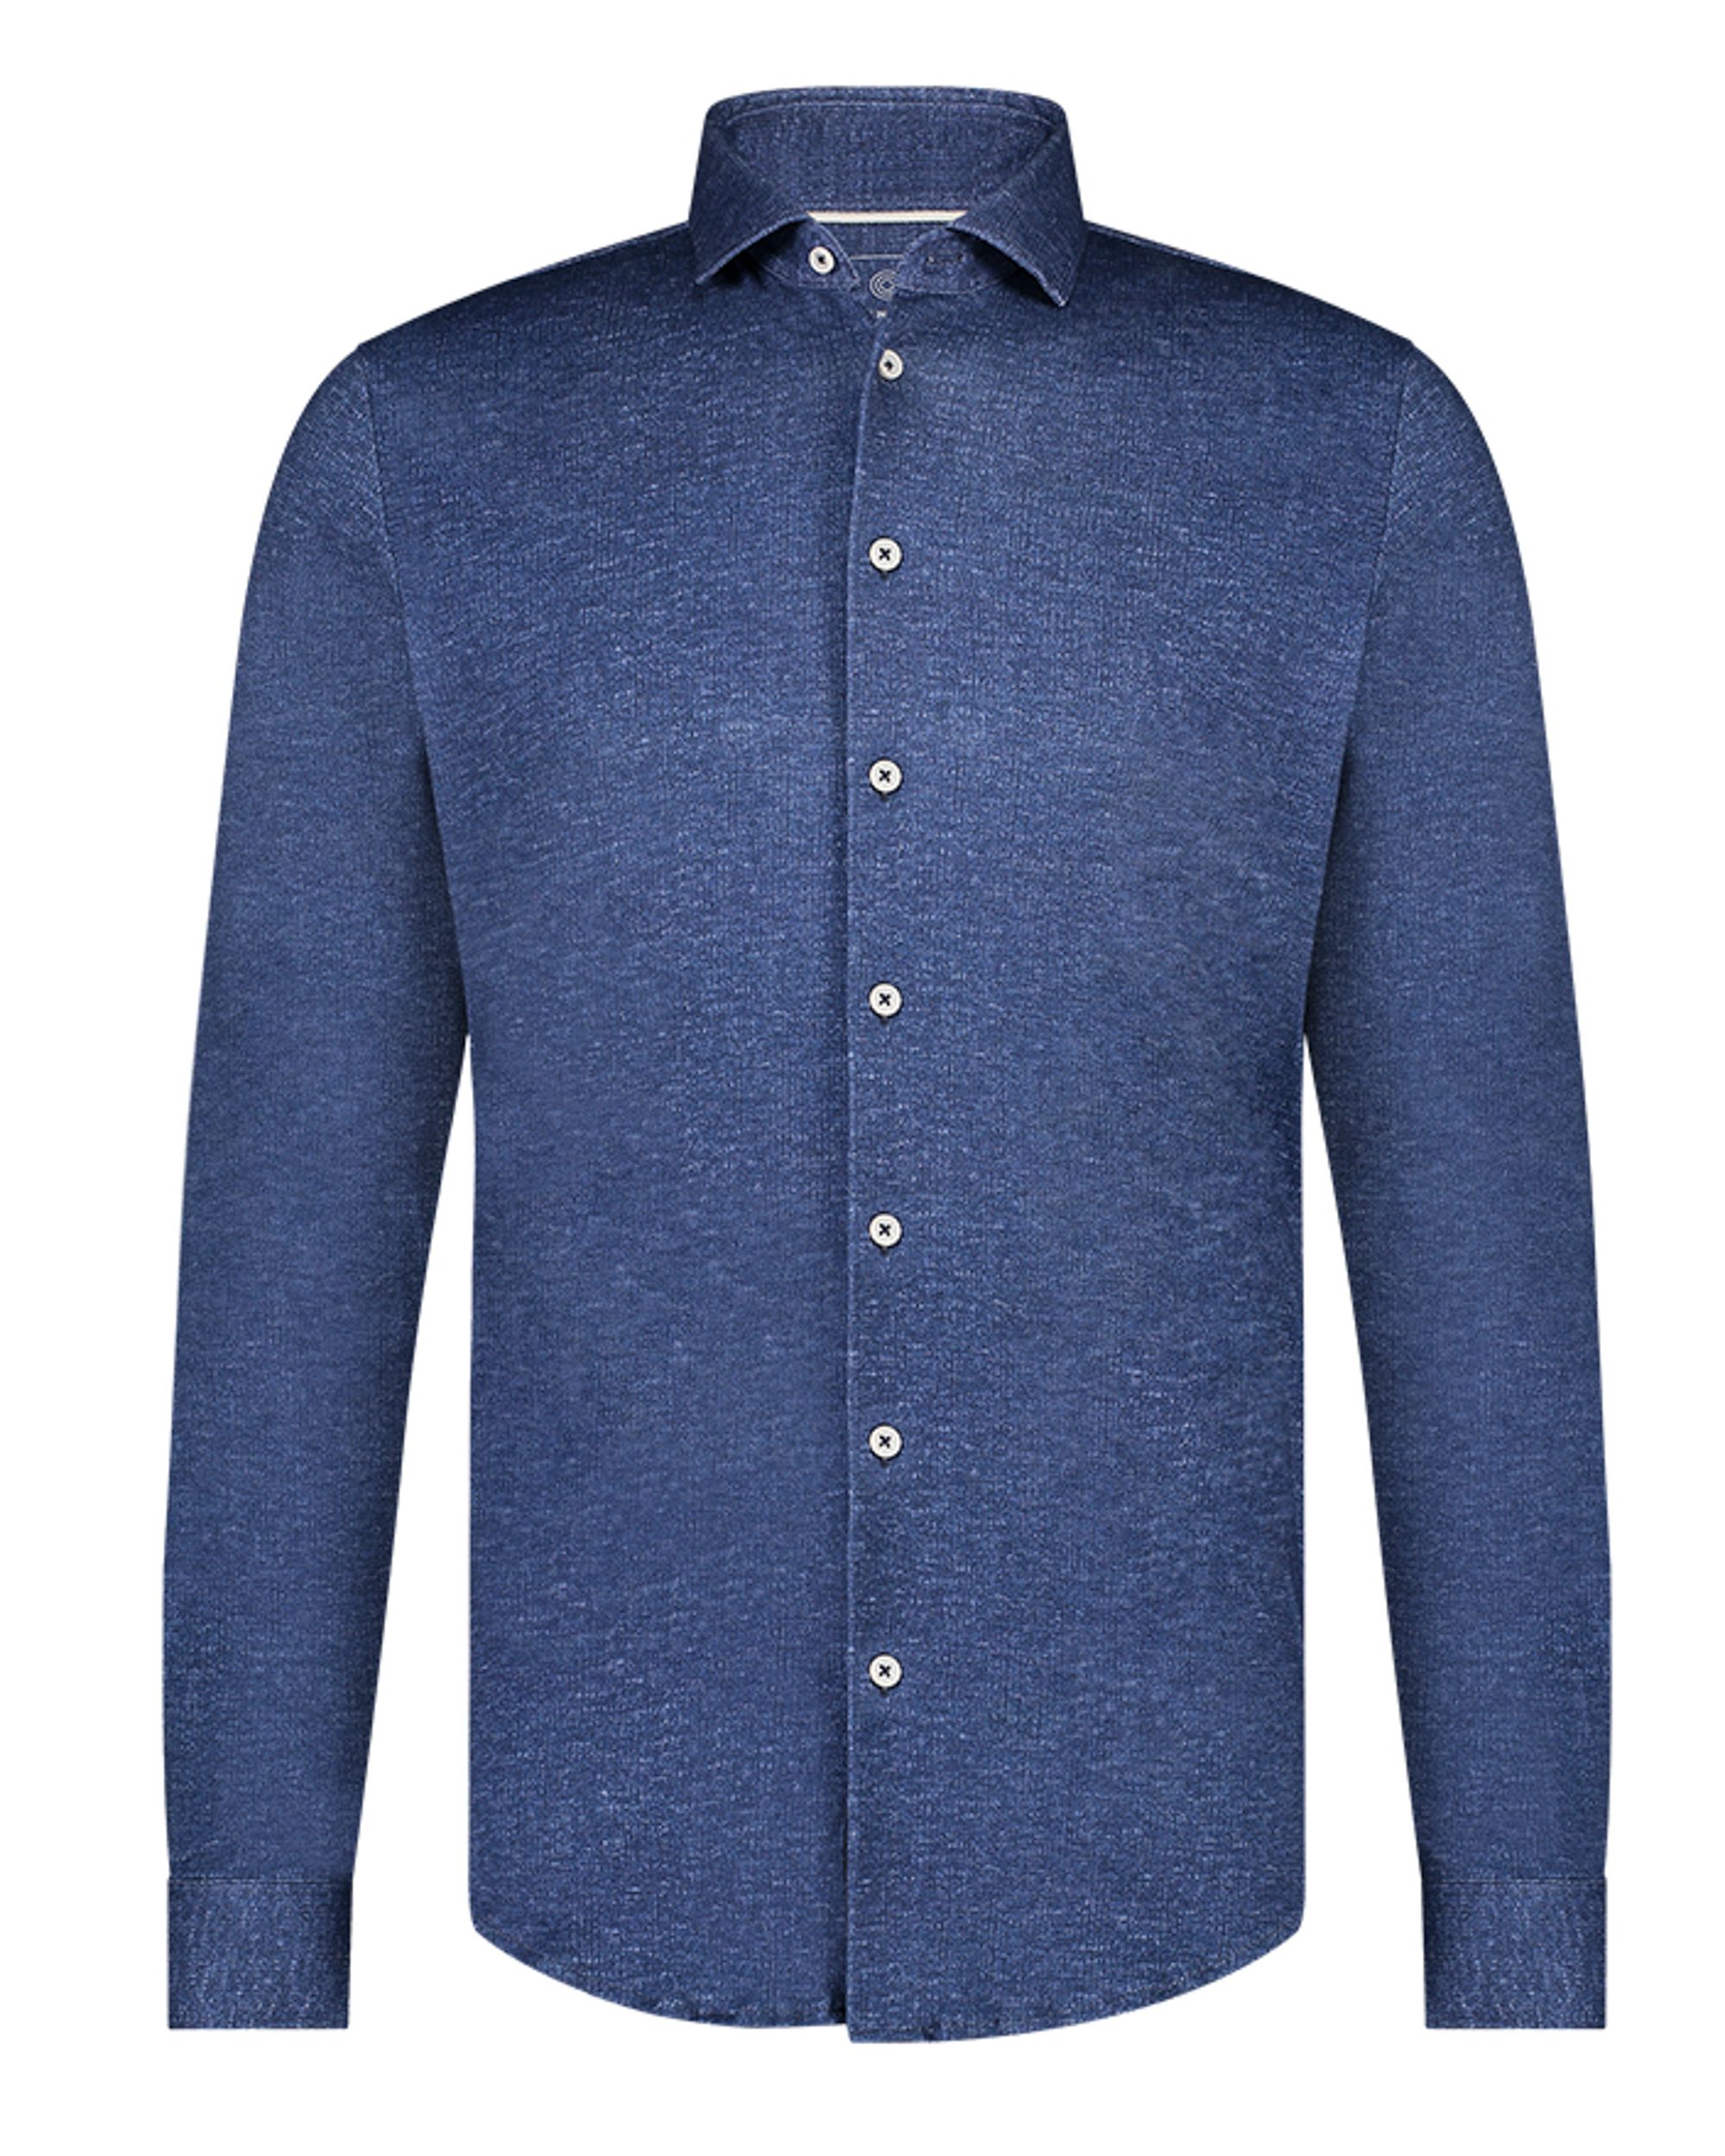 Blue Industry Casual Overhemd LM Blauw 092831-001-37